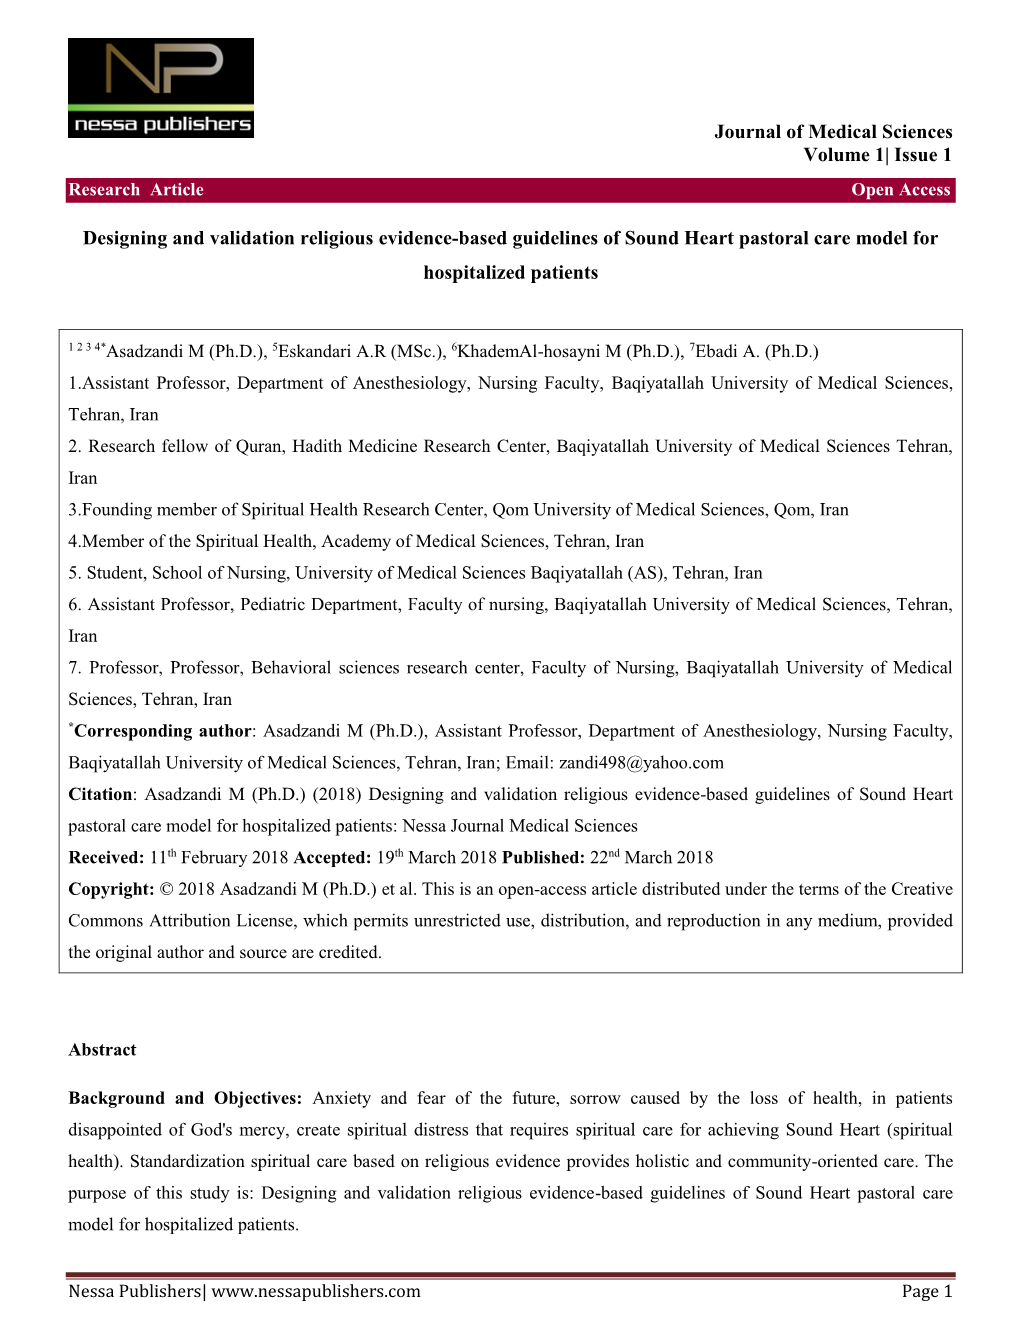 Designing and Validation Religious Evidence-Based Guidelines of Sound Heart Pastoral Care Model for Hospitalized Patients